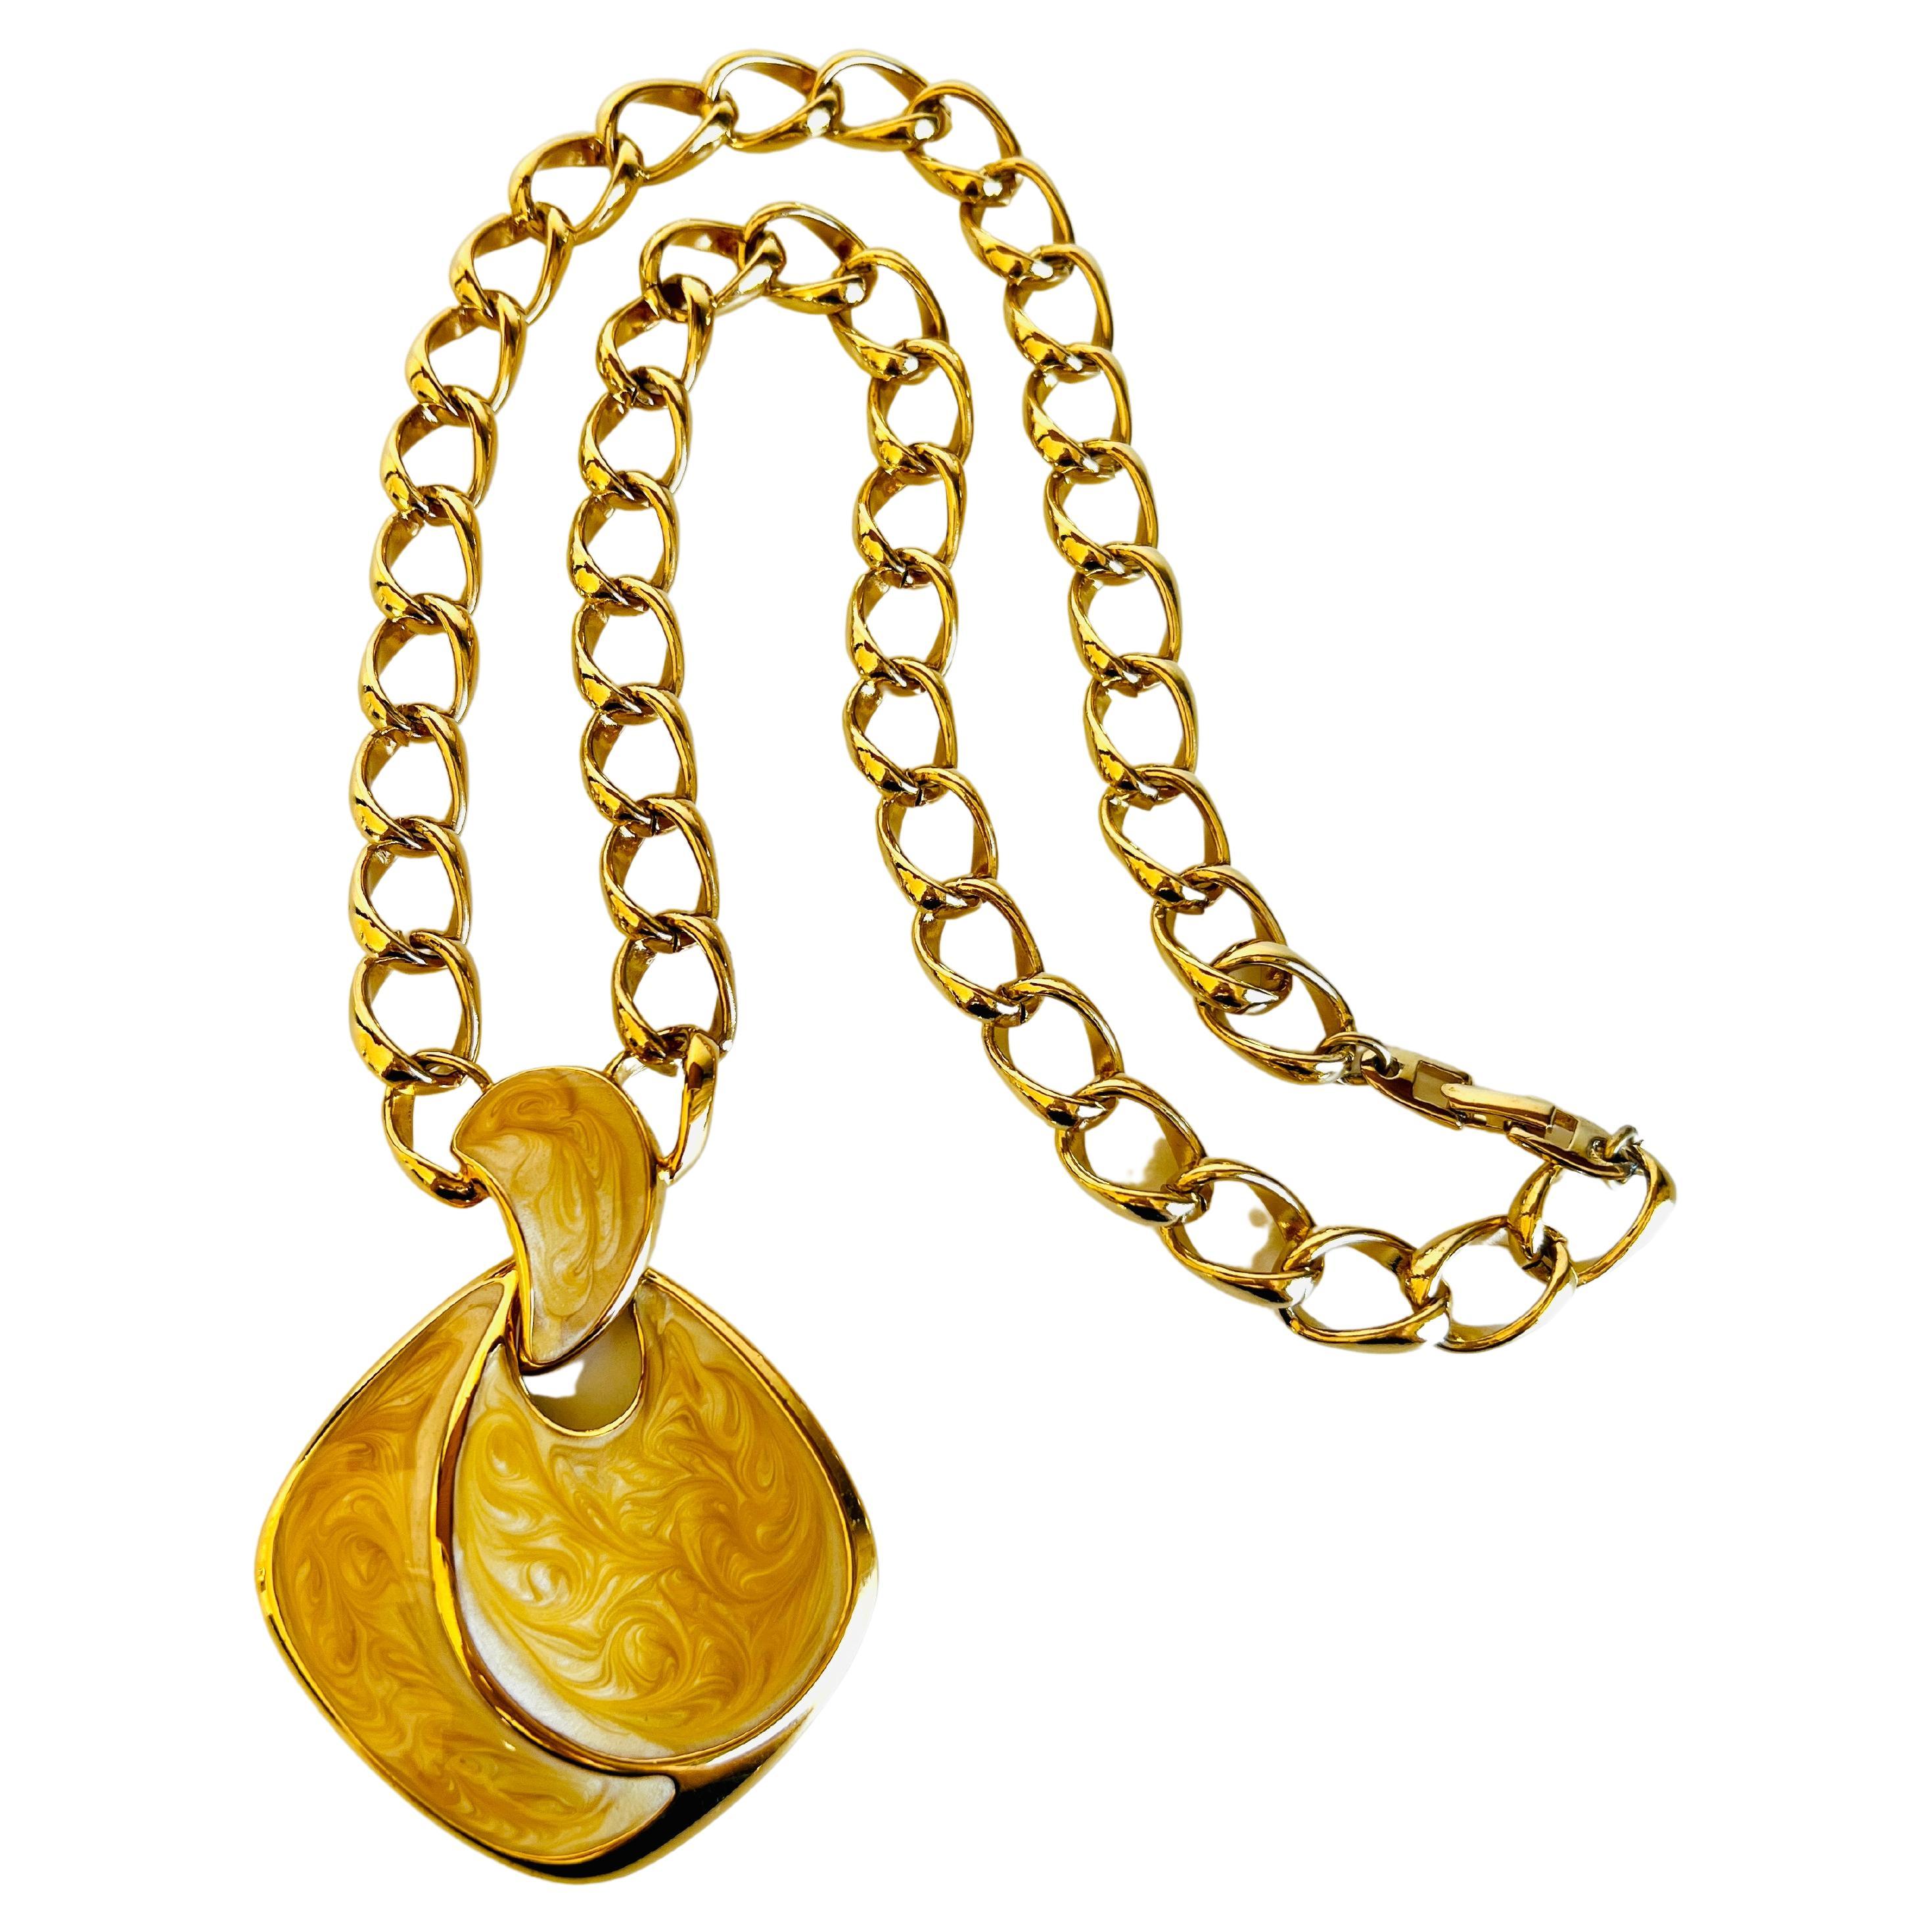 Fabulous gold chain necklace featuring a large yellowish gold enamel pendant by Napier. 

Length: 24